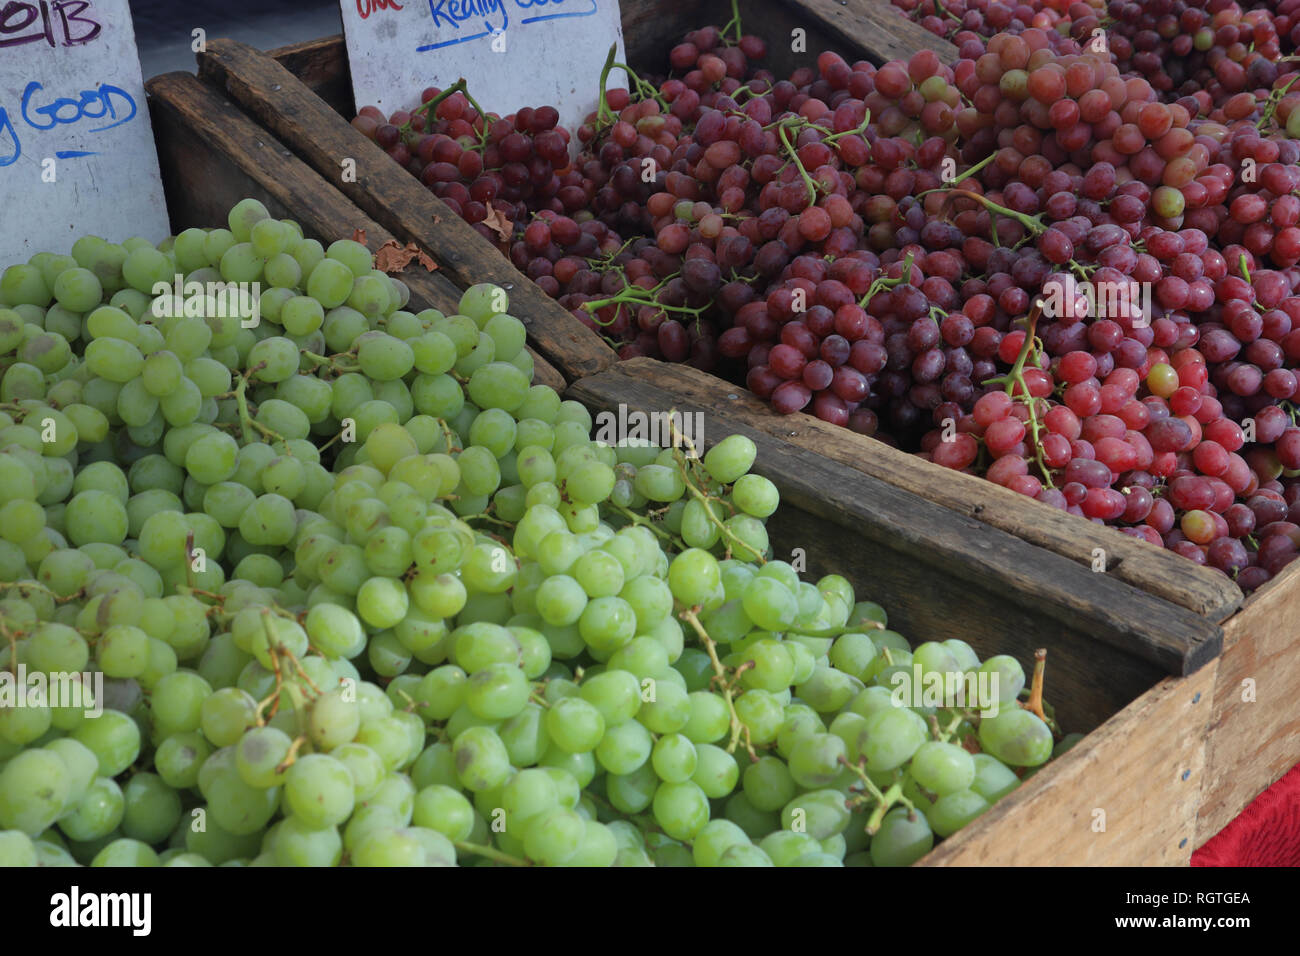 Organic Green Grapes in a Market Stock Image - Image of health